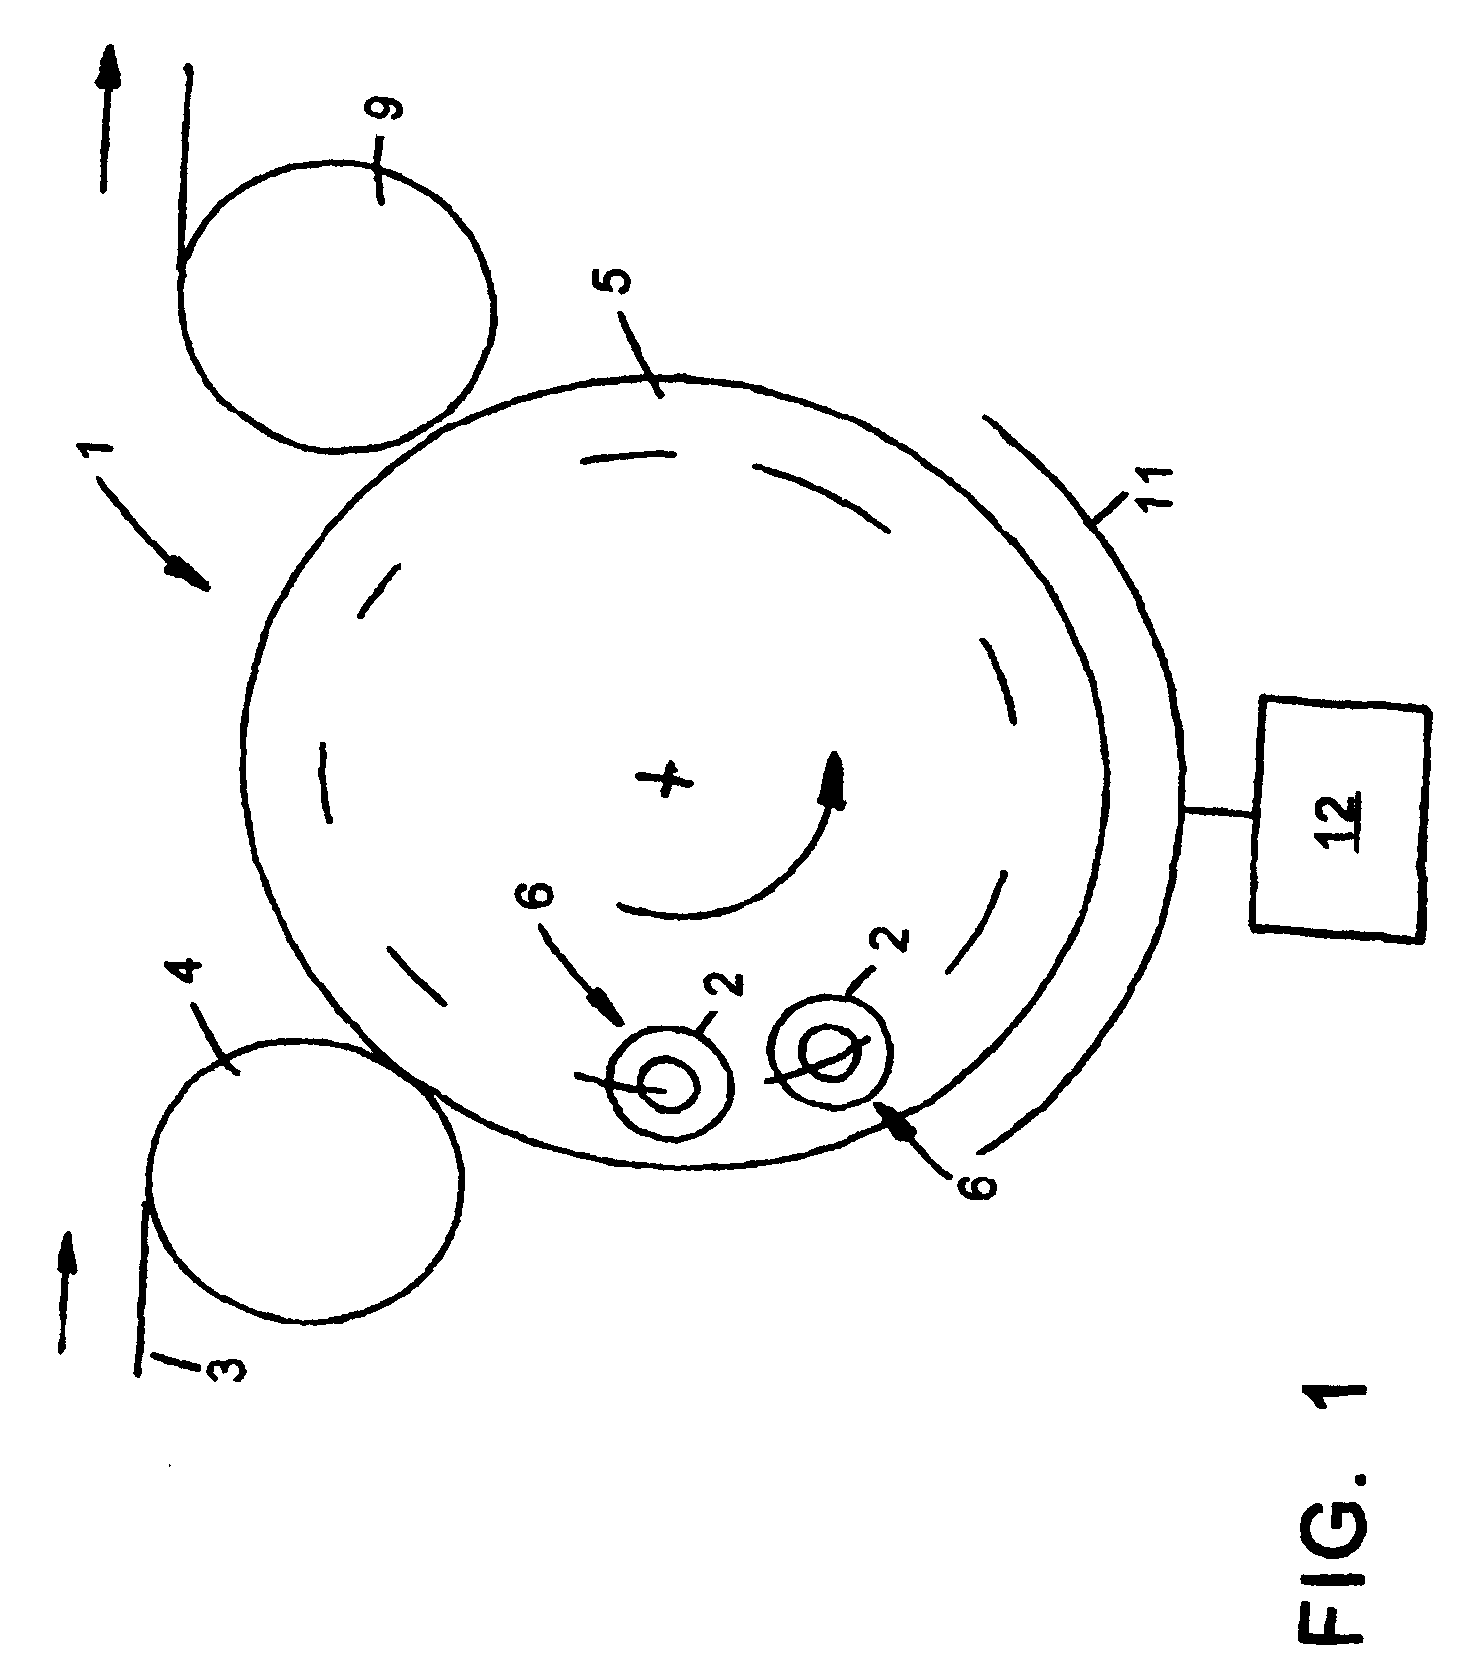 Beverage bottling plant with method and apparatus for cleaning, filling, and closing bottles